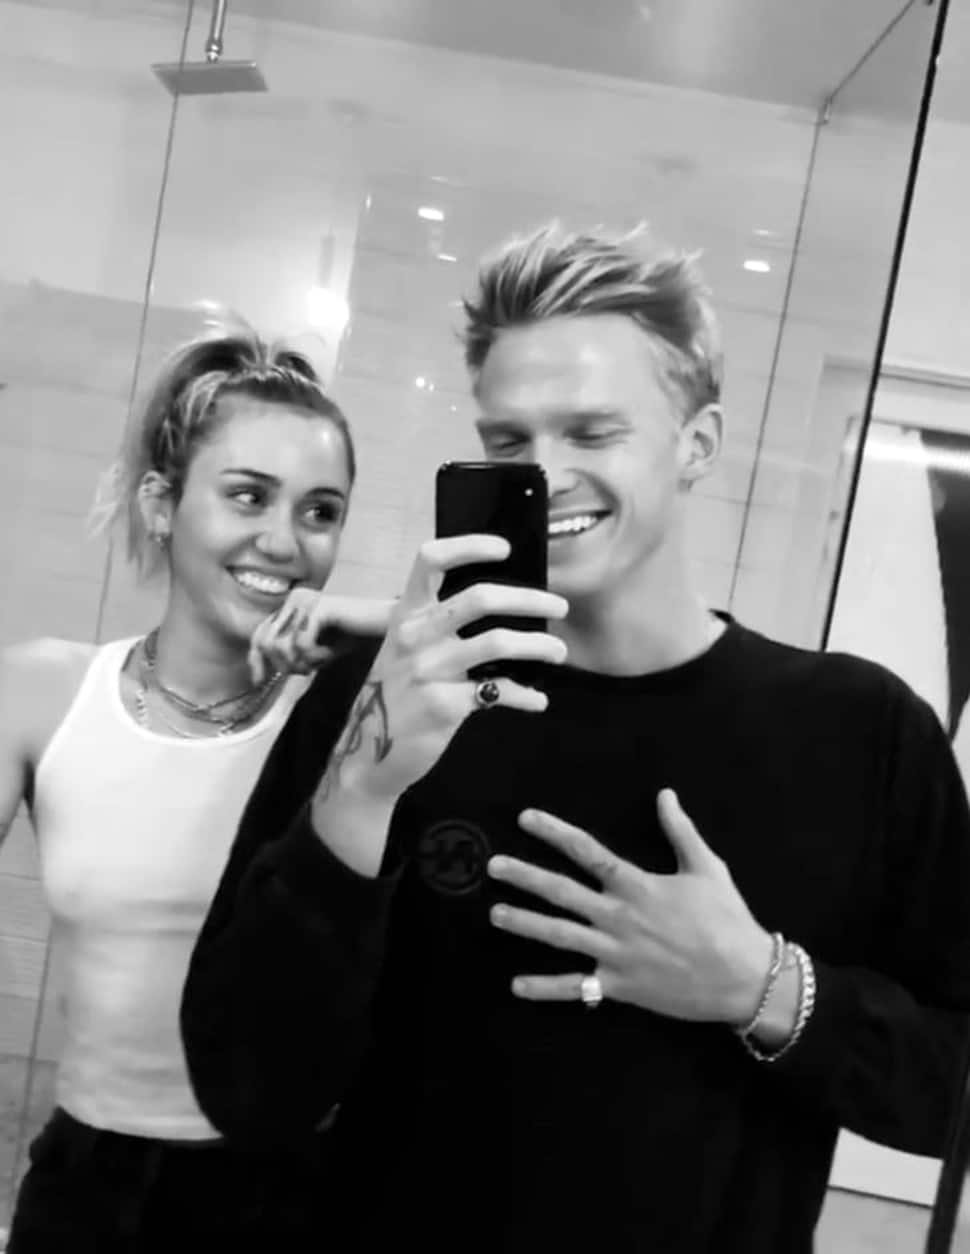 Cody Simpson and Miley Cyrus were involved in a whirlwind romance of 10 months before calling it quits back in 2020. (Source: Twitter)